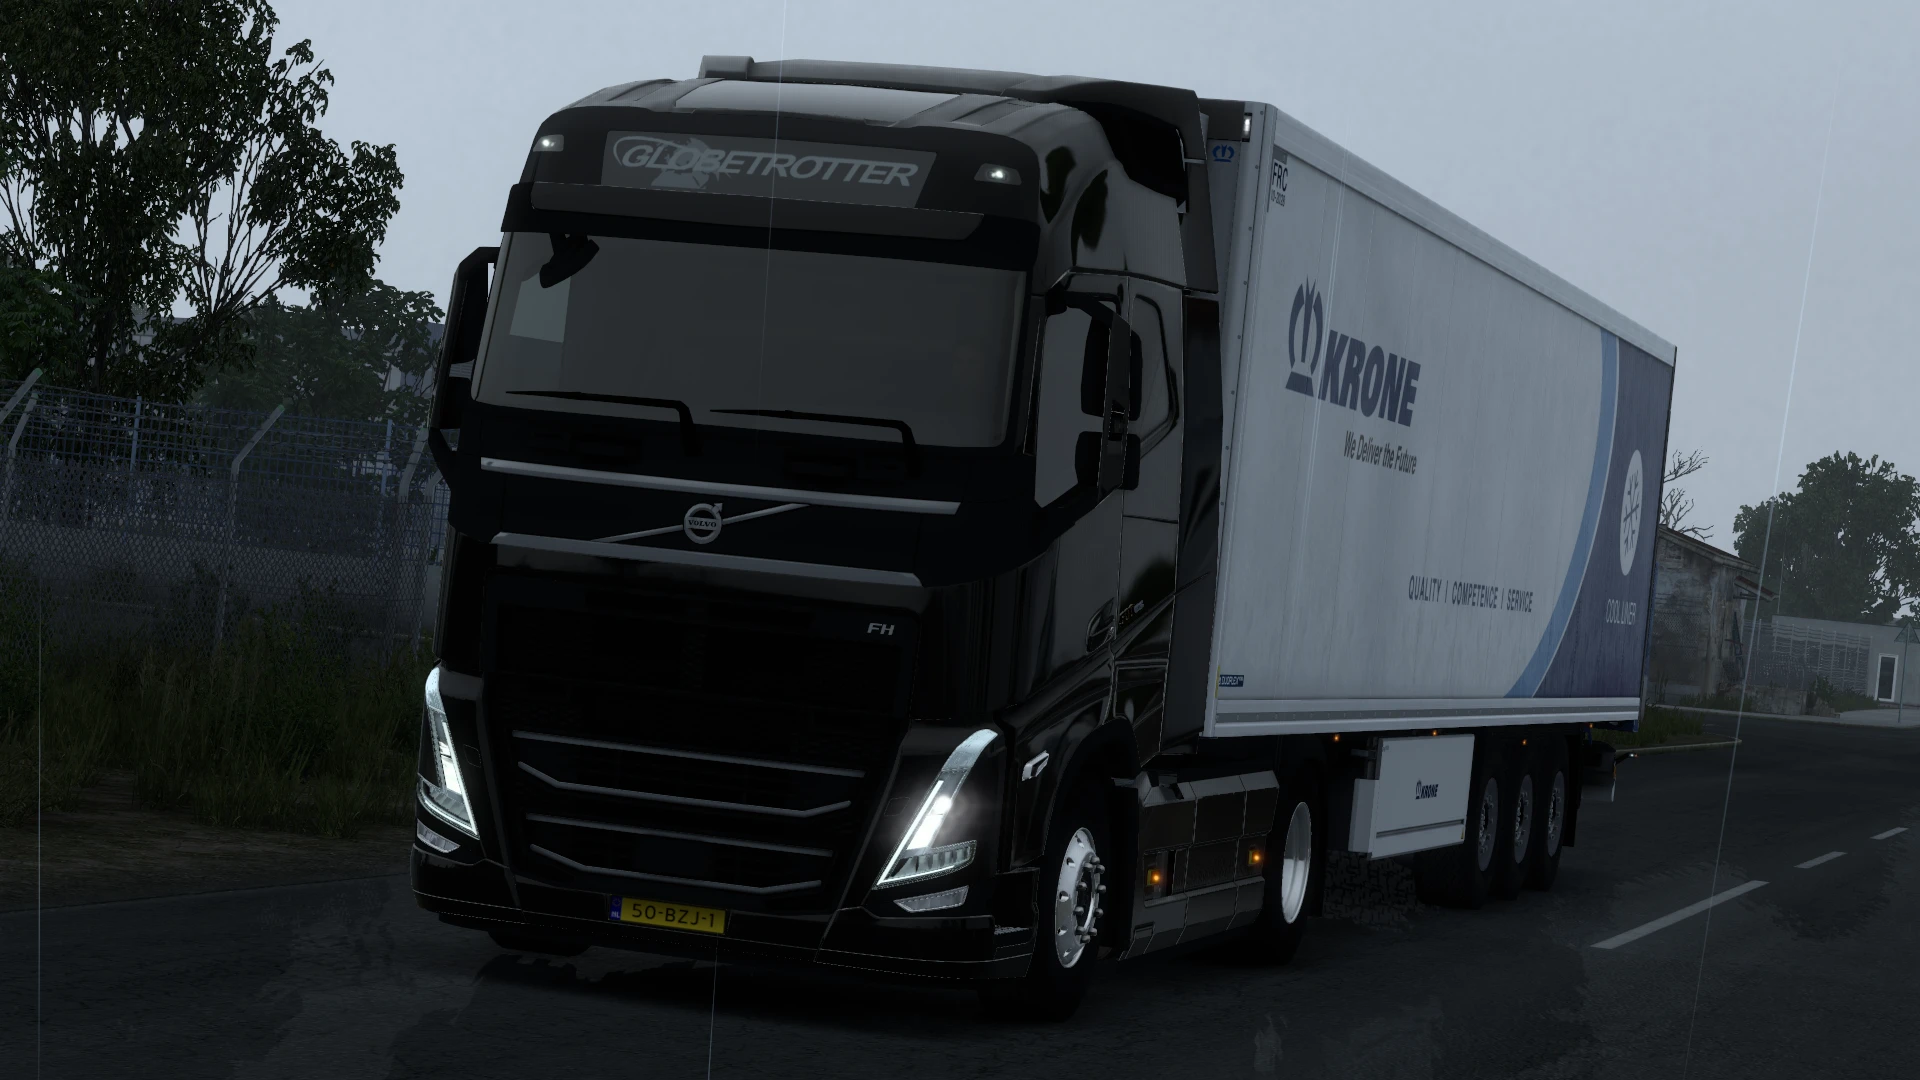 Volvo FH5 by Zahed Truck v2.1.4 - ETS 2